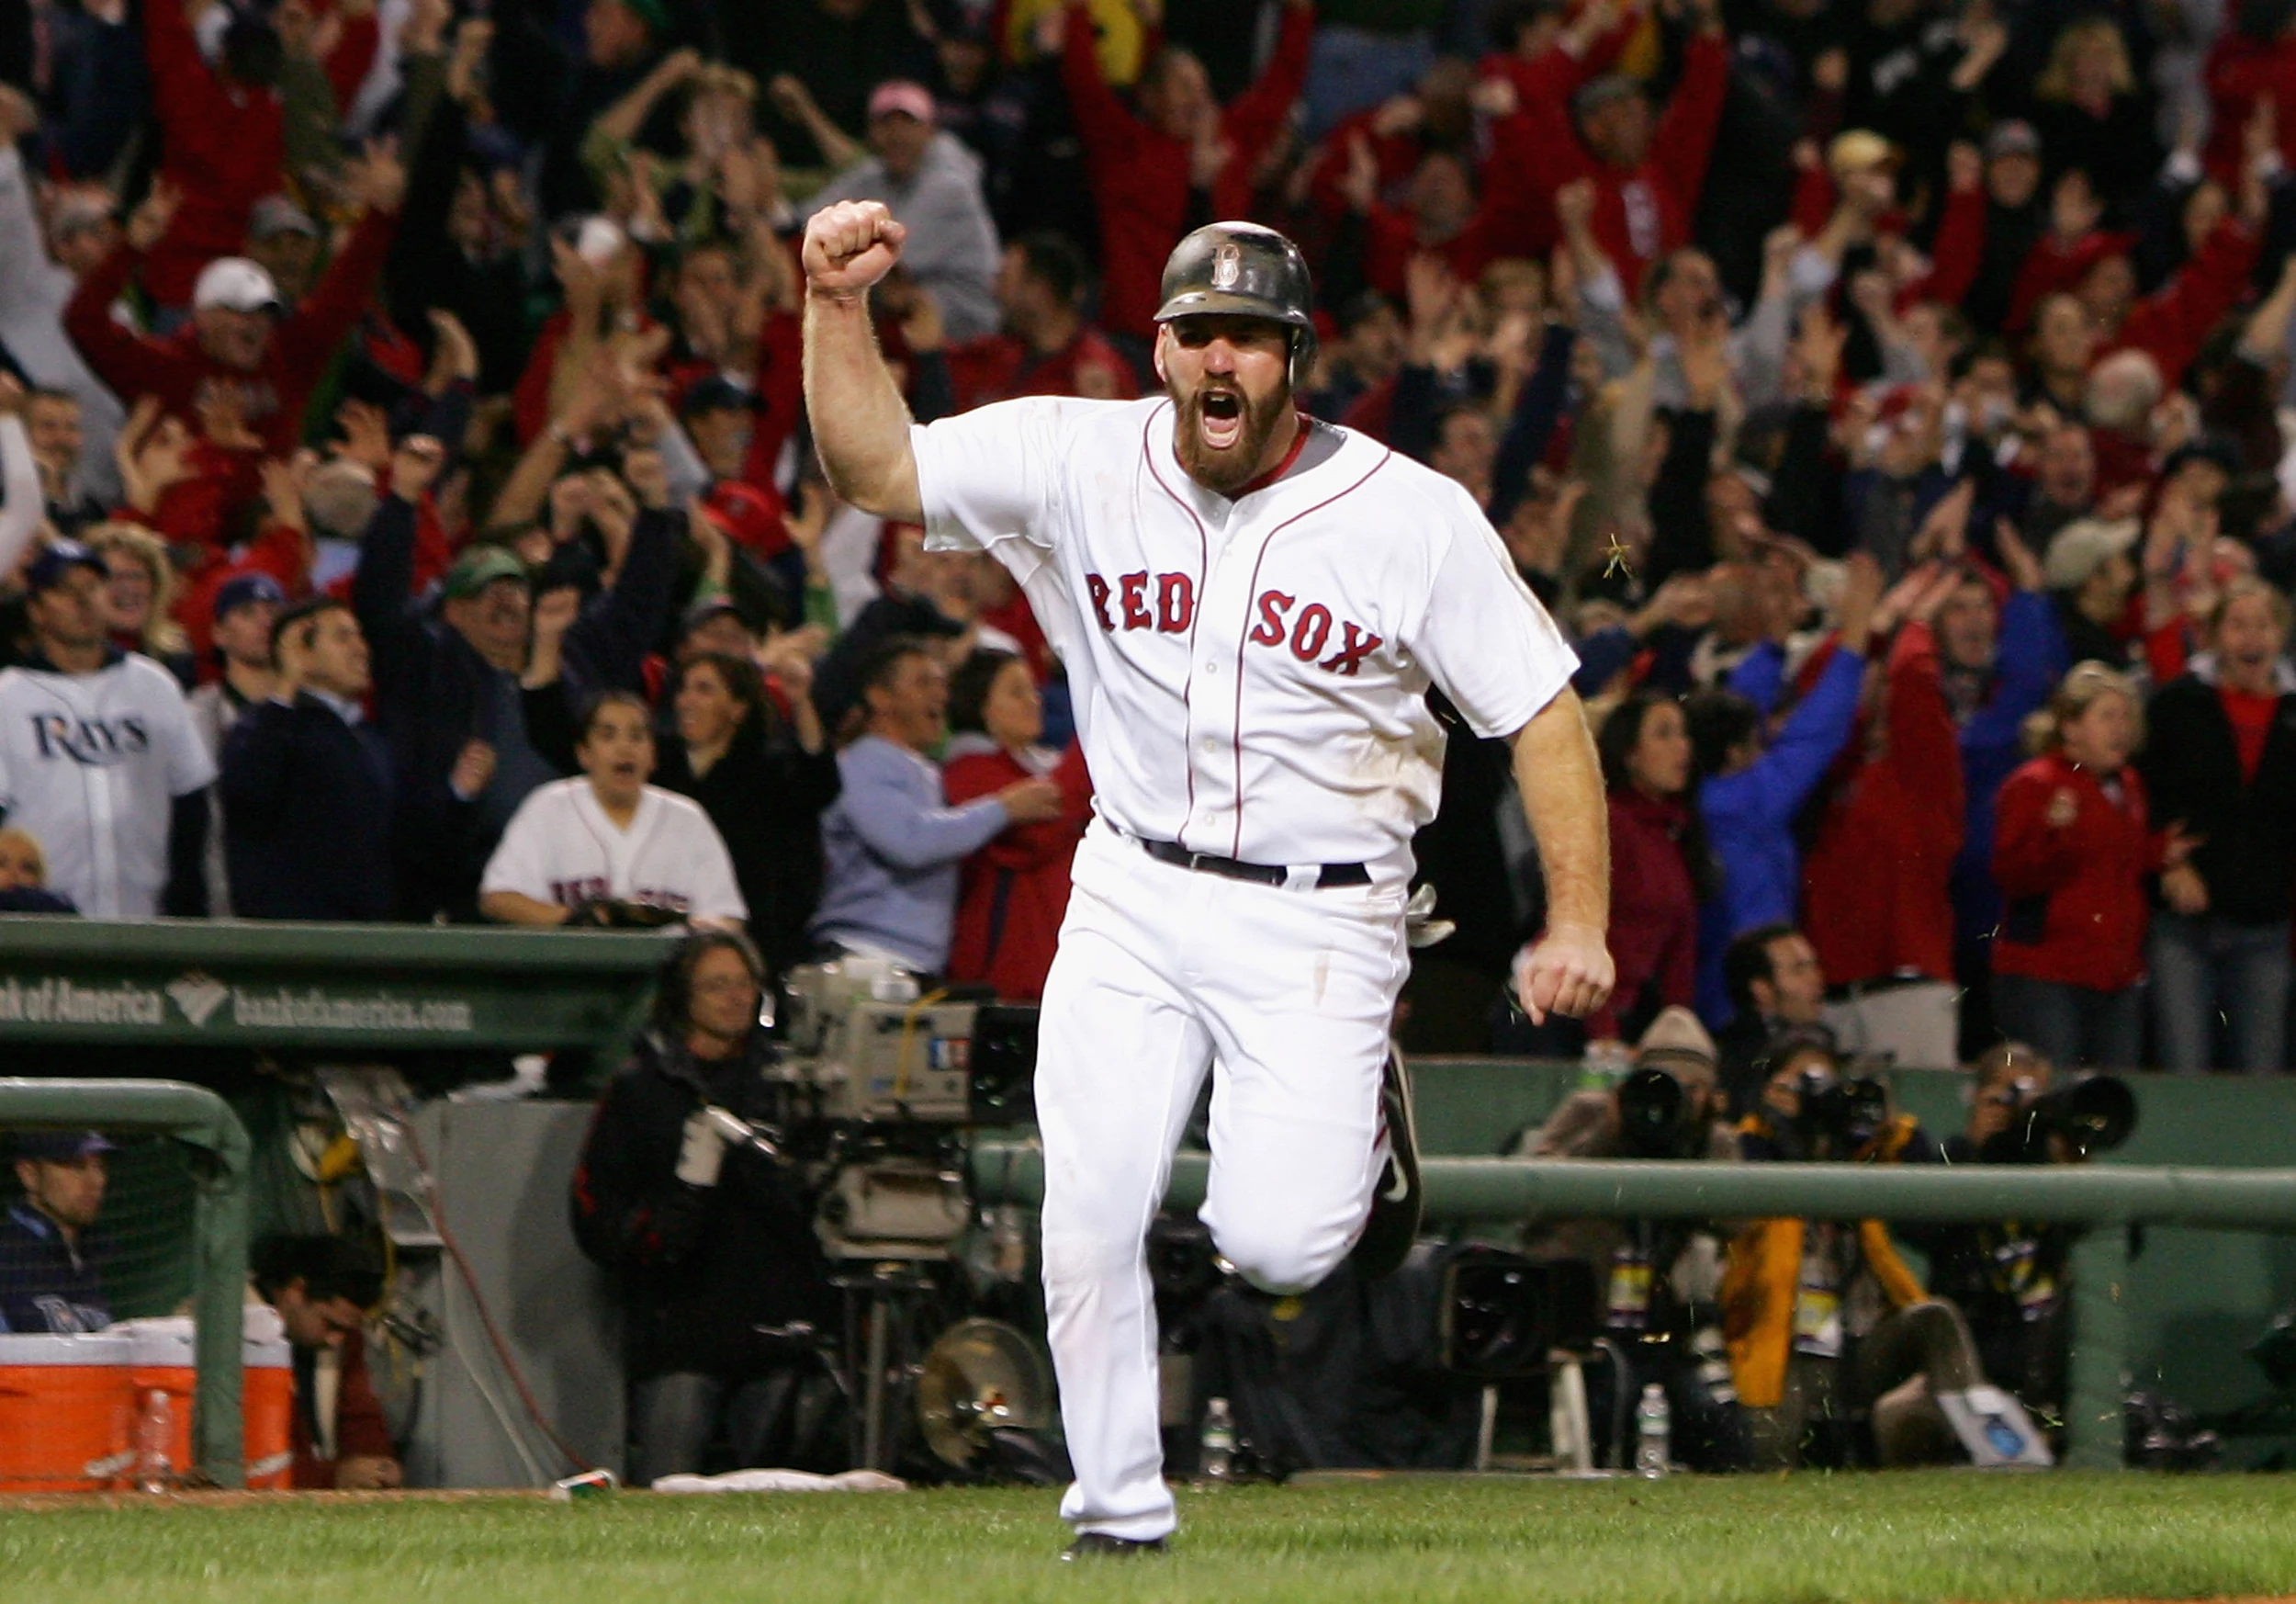 Kevin Youkilis Joins The Fight To Change The Name of University of